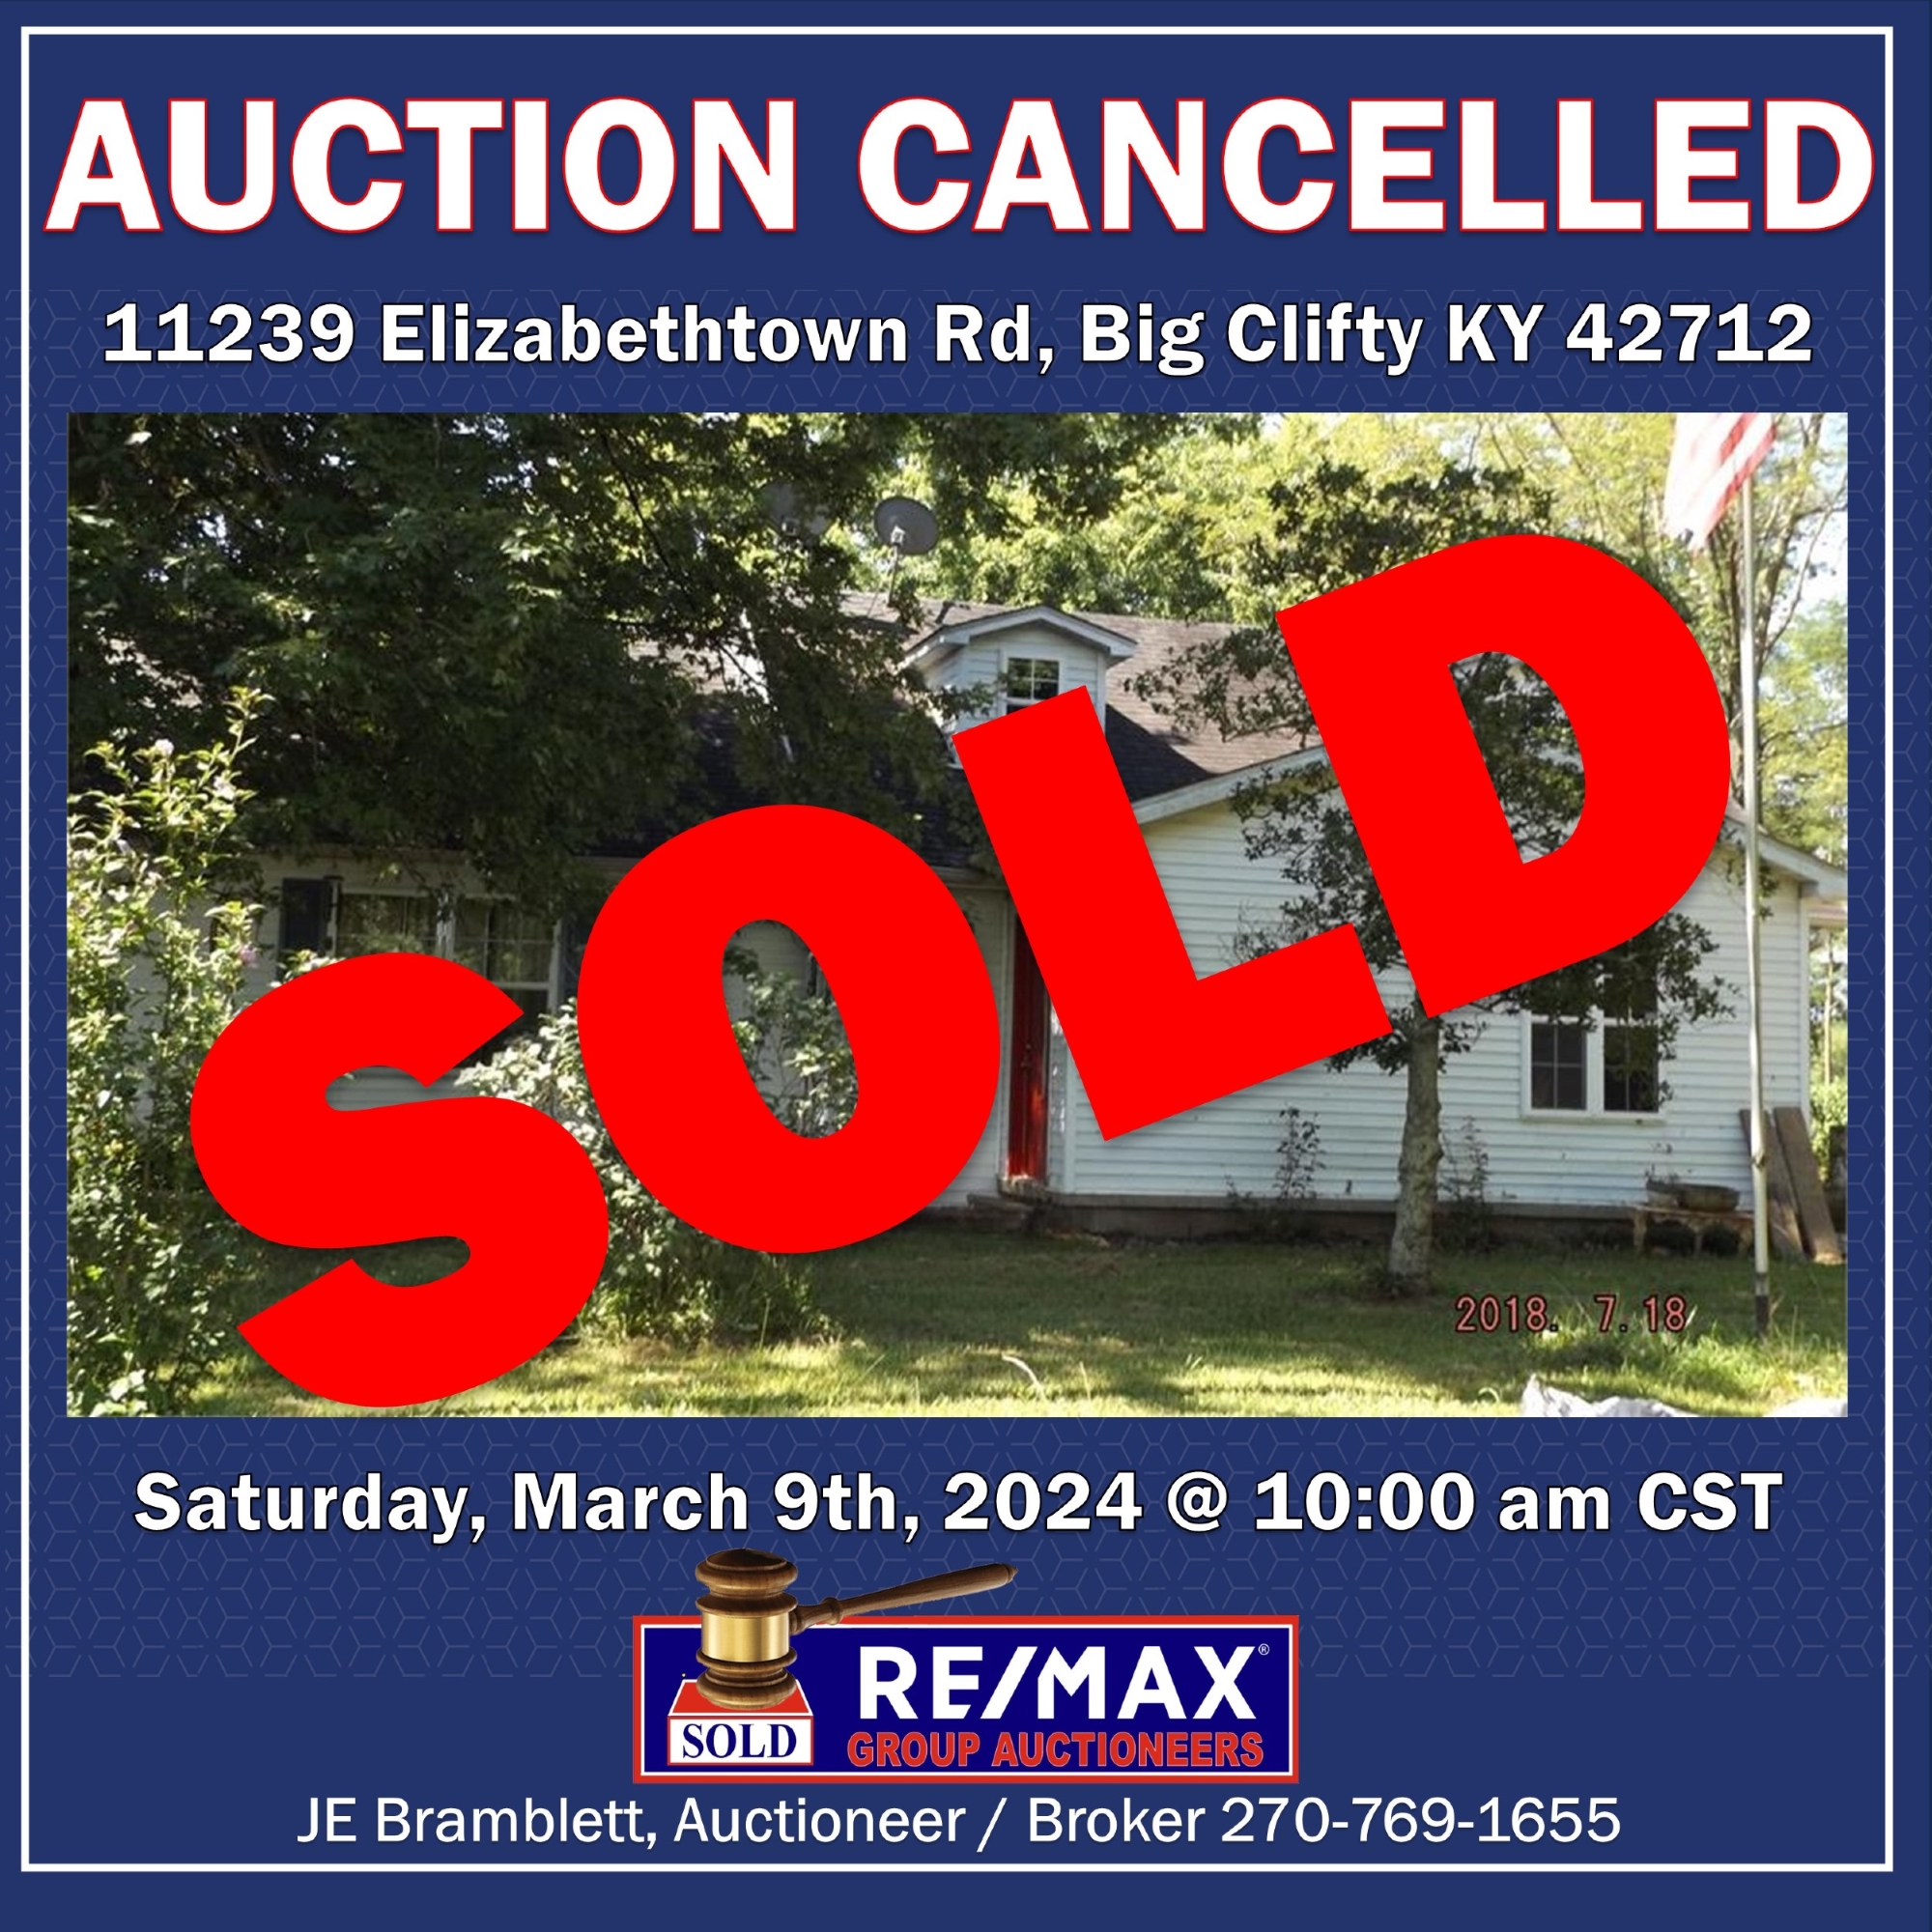 Upcoming Auctions Archives - RE/MAX Group Auctioneers, Hardin County, Elizabethtown, Fort Knox